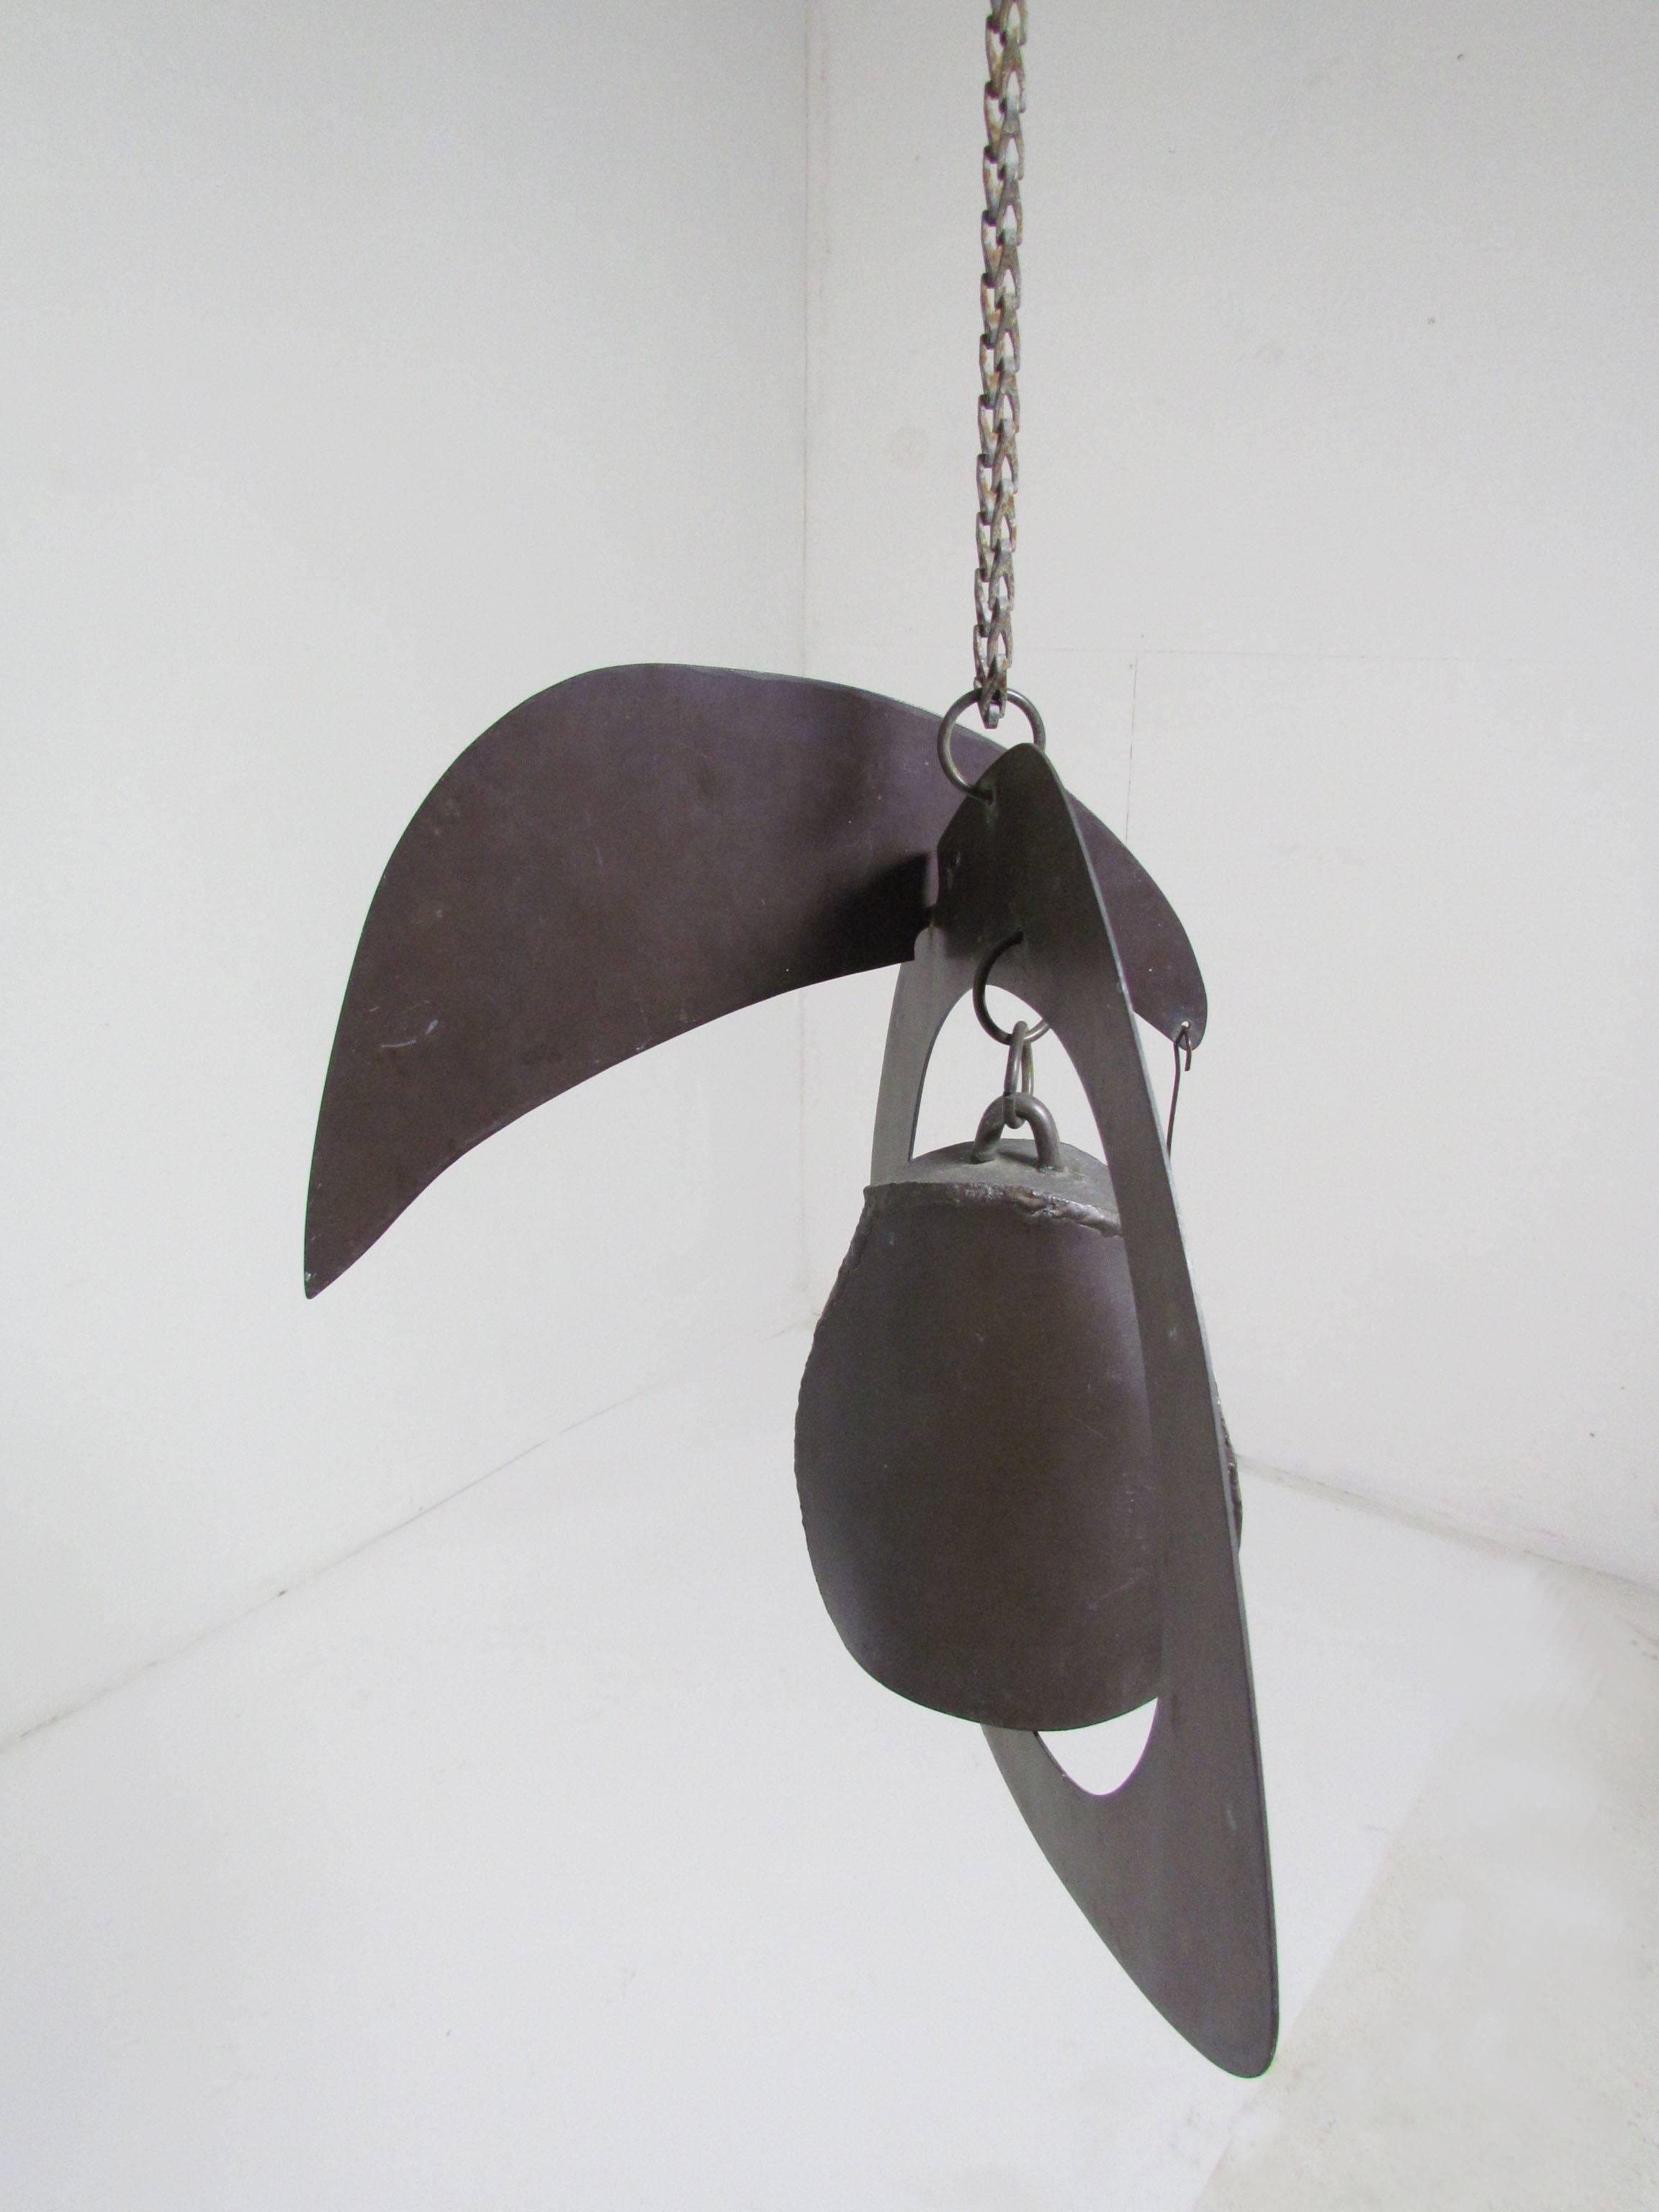 Mid-Century Modern Handmade Hanging Abstract Sculpture, Kinetic Wind Chime/Bell, circa 1970s